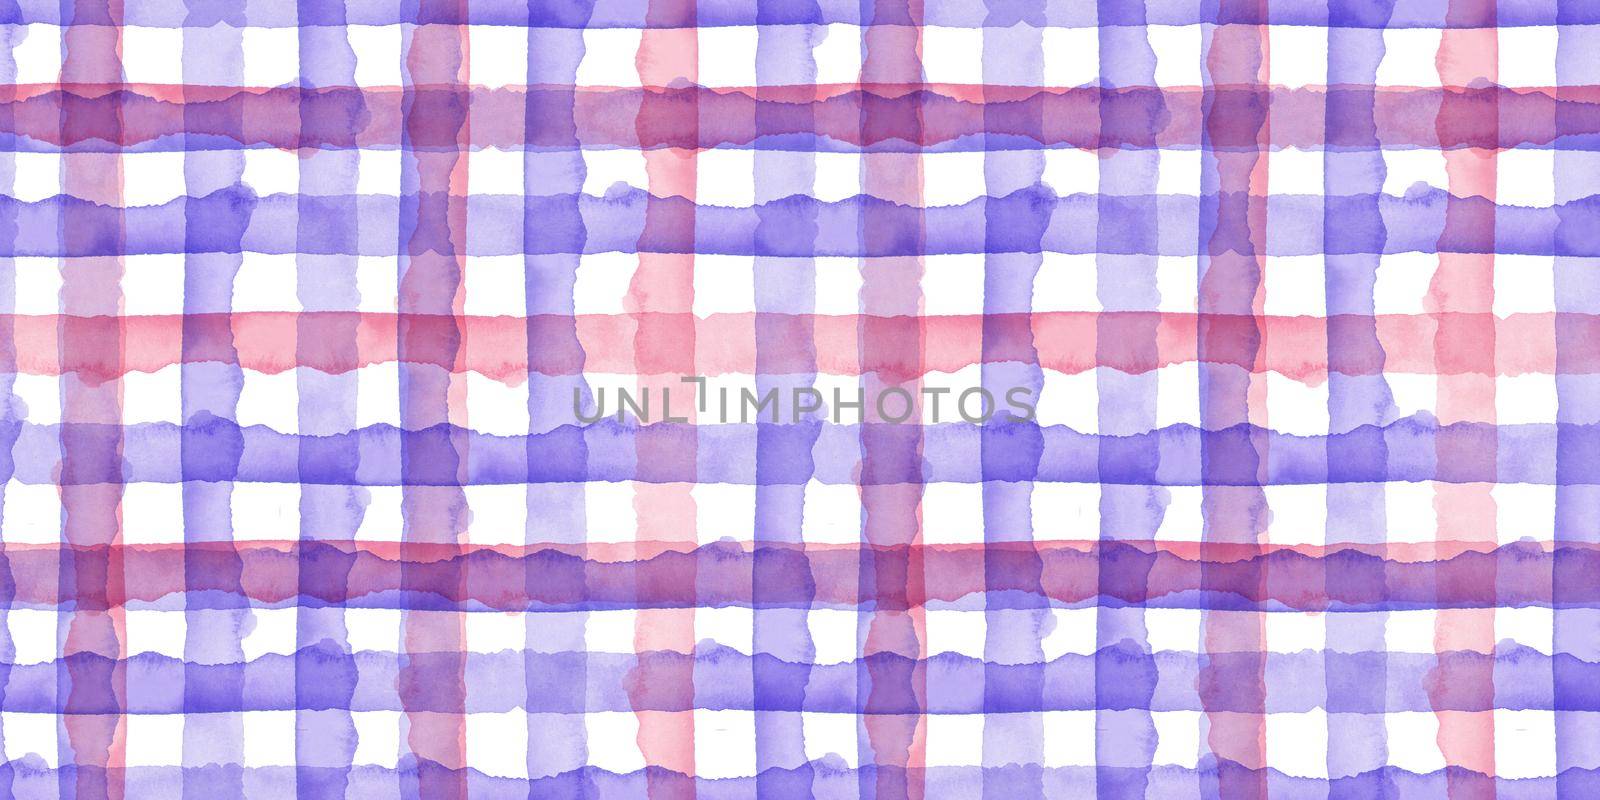 Watercolor Pink Violet Check Seamless Pattern. Simple Plaid Fabric Background. Hand Painted Simple Design with Stripes